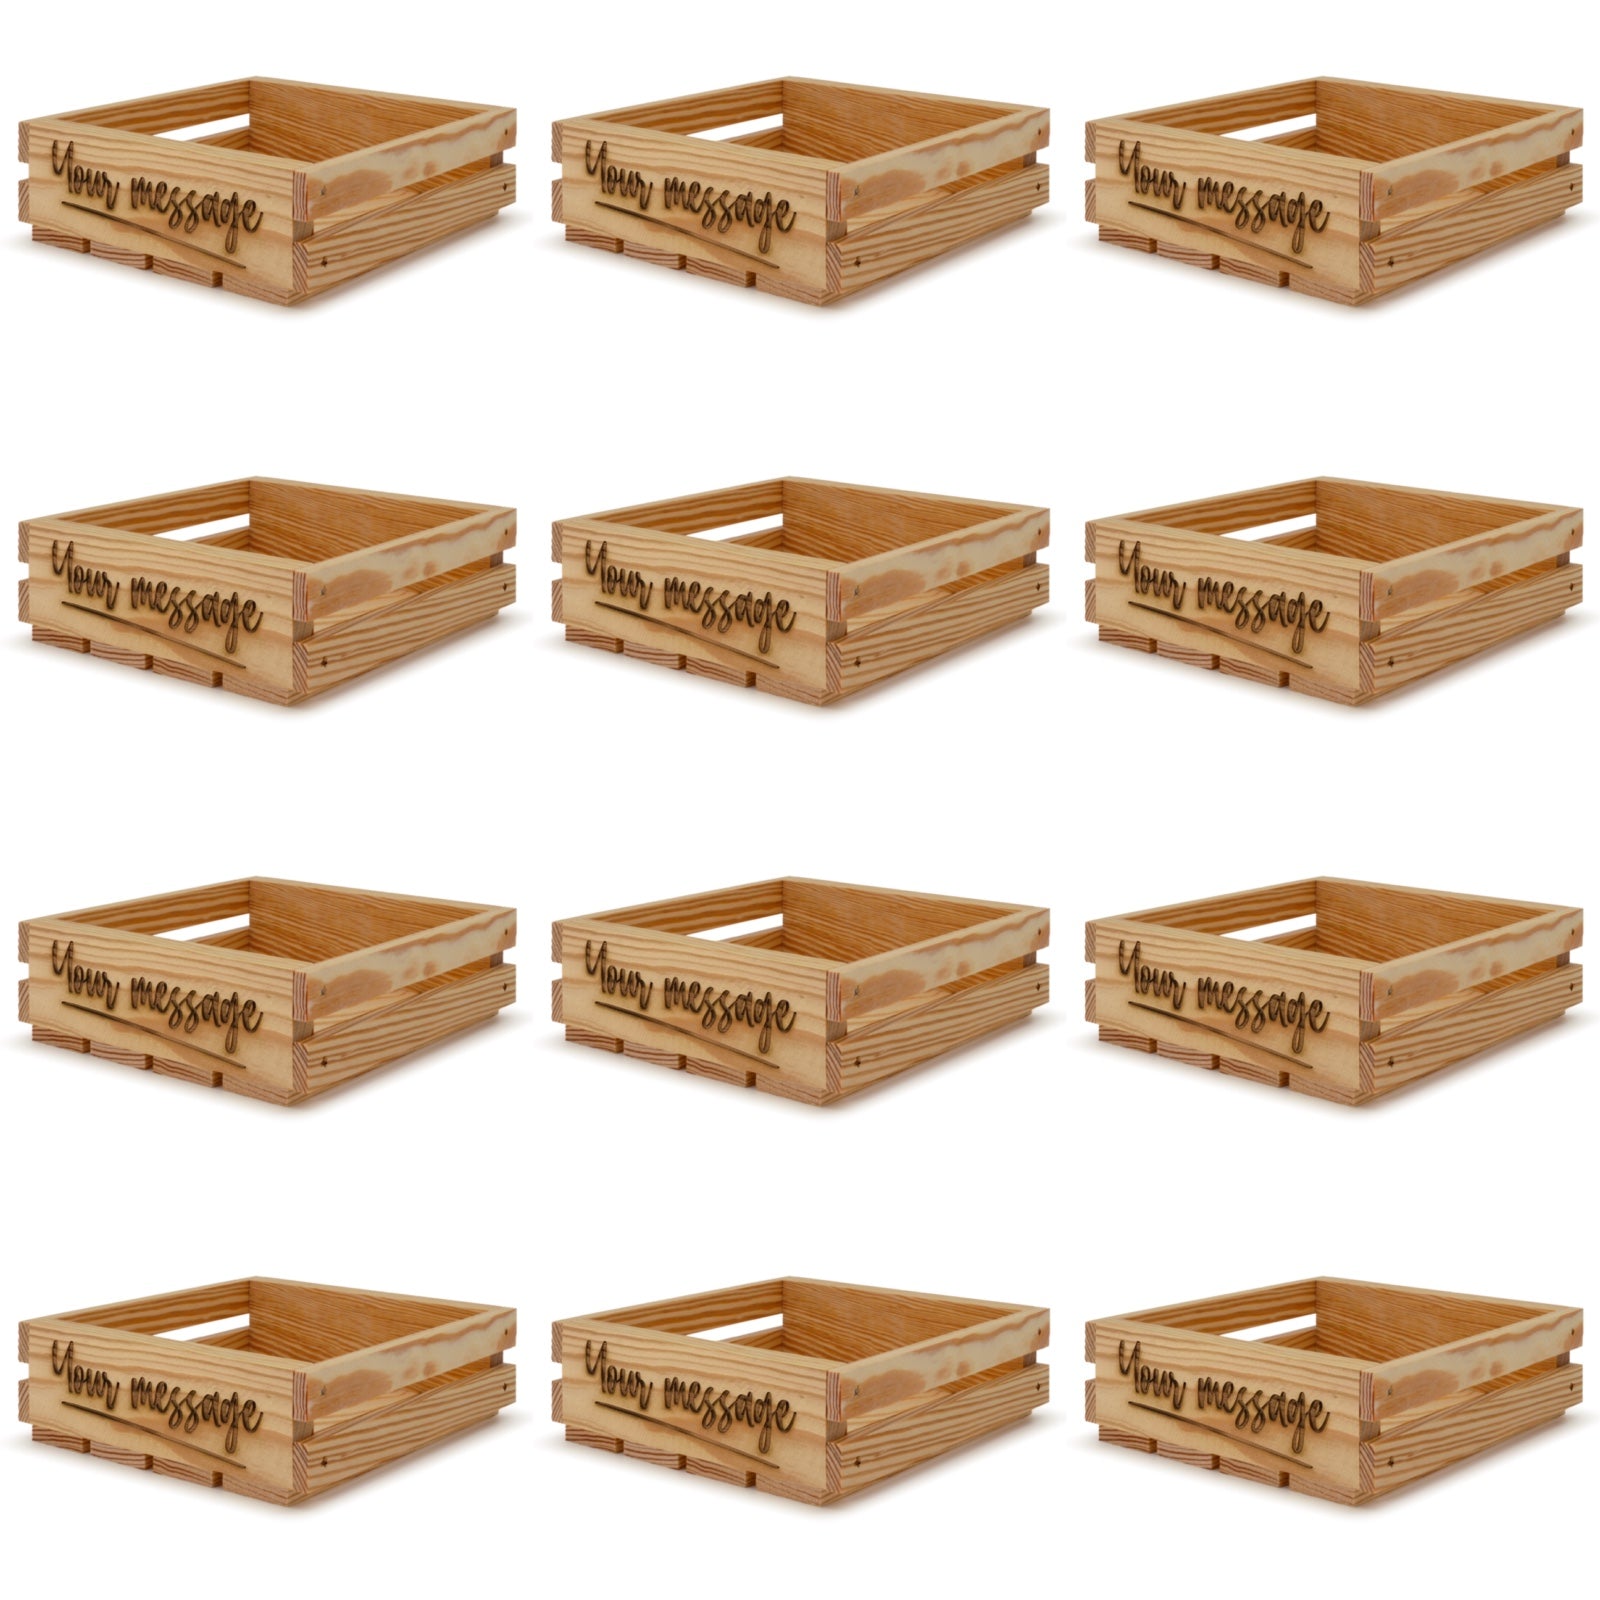 12 Small wooden crates 8x8x2.5 your message included